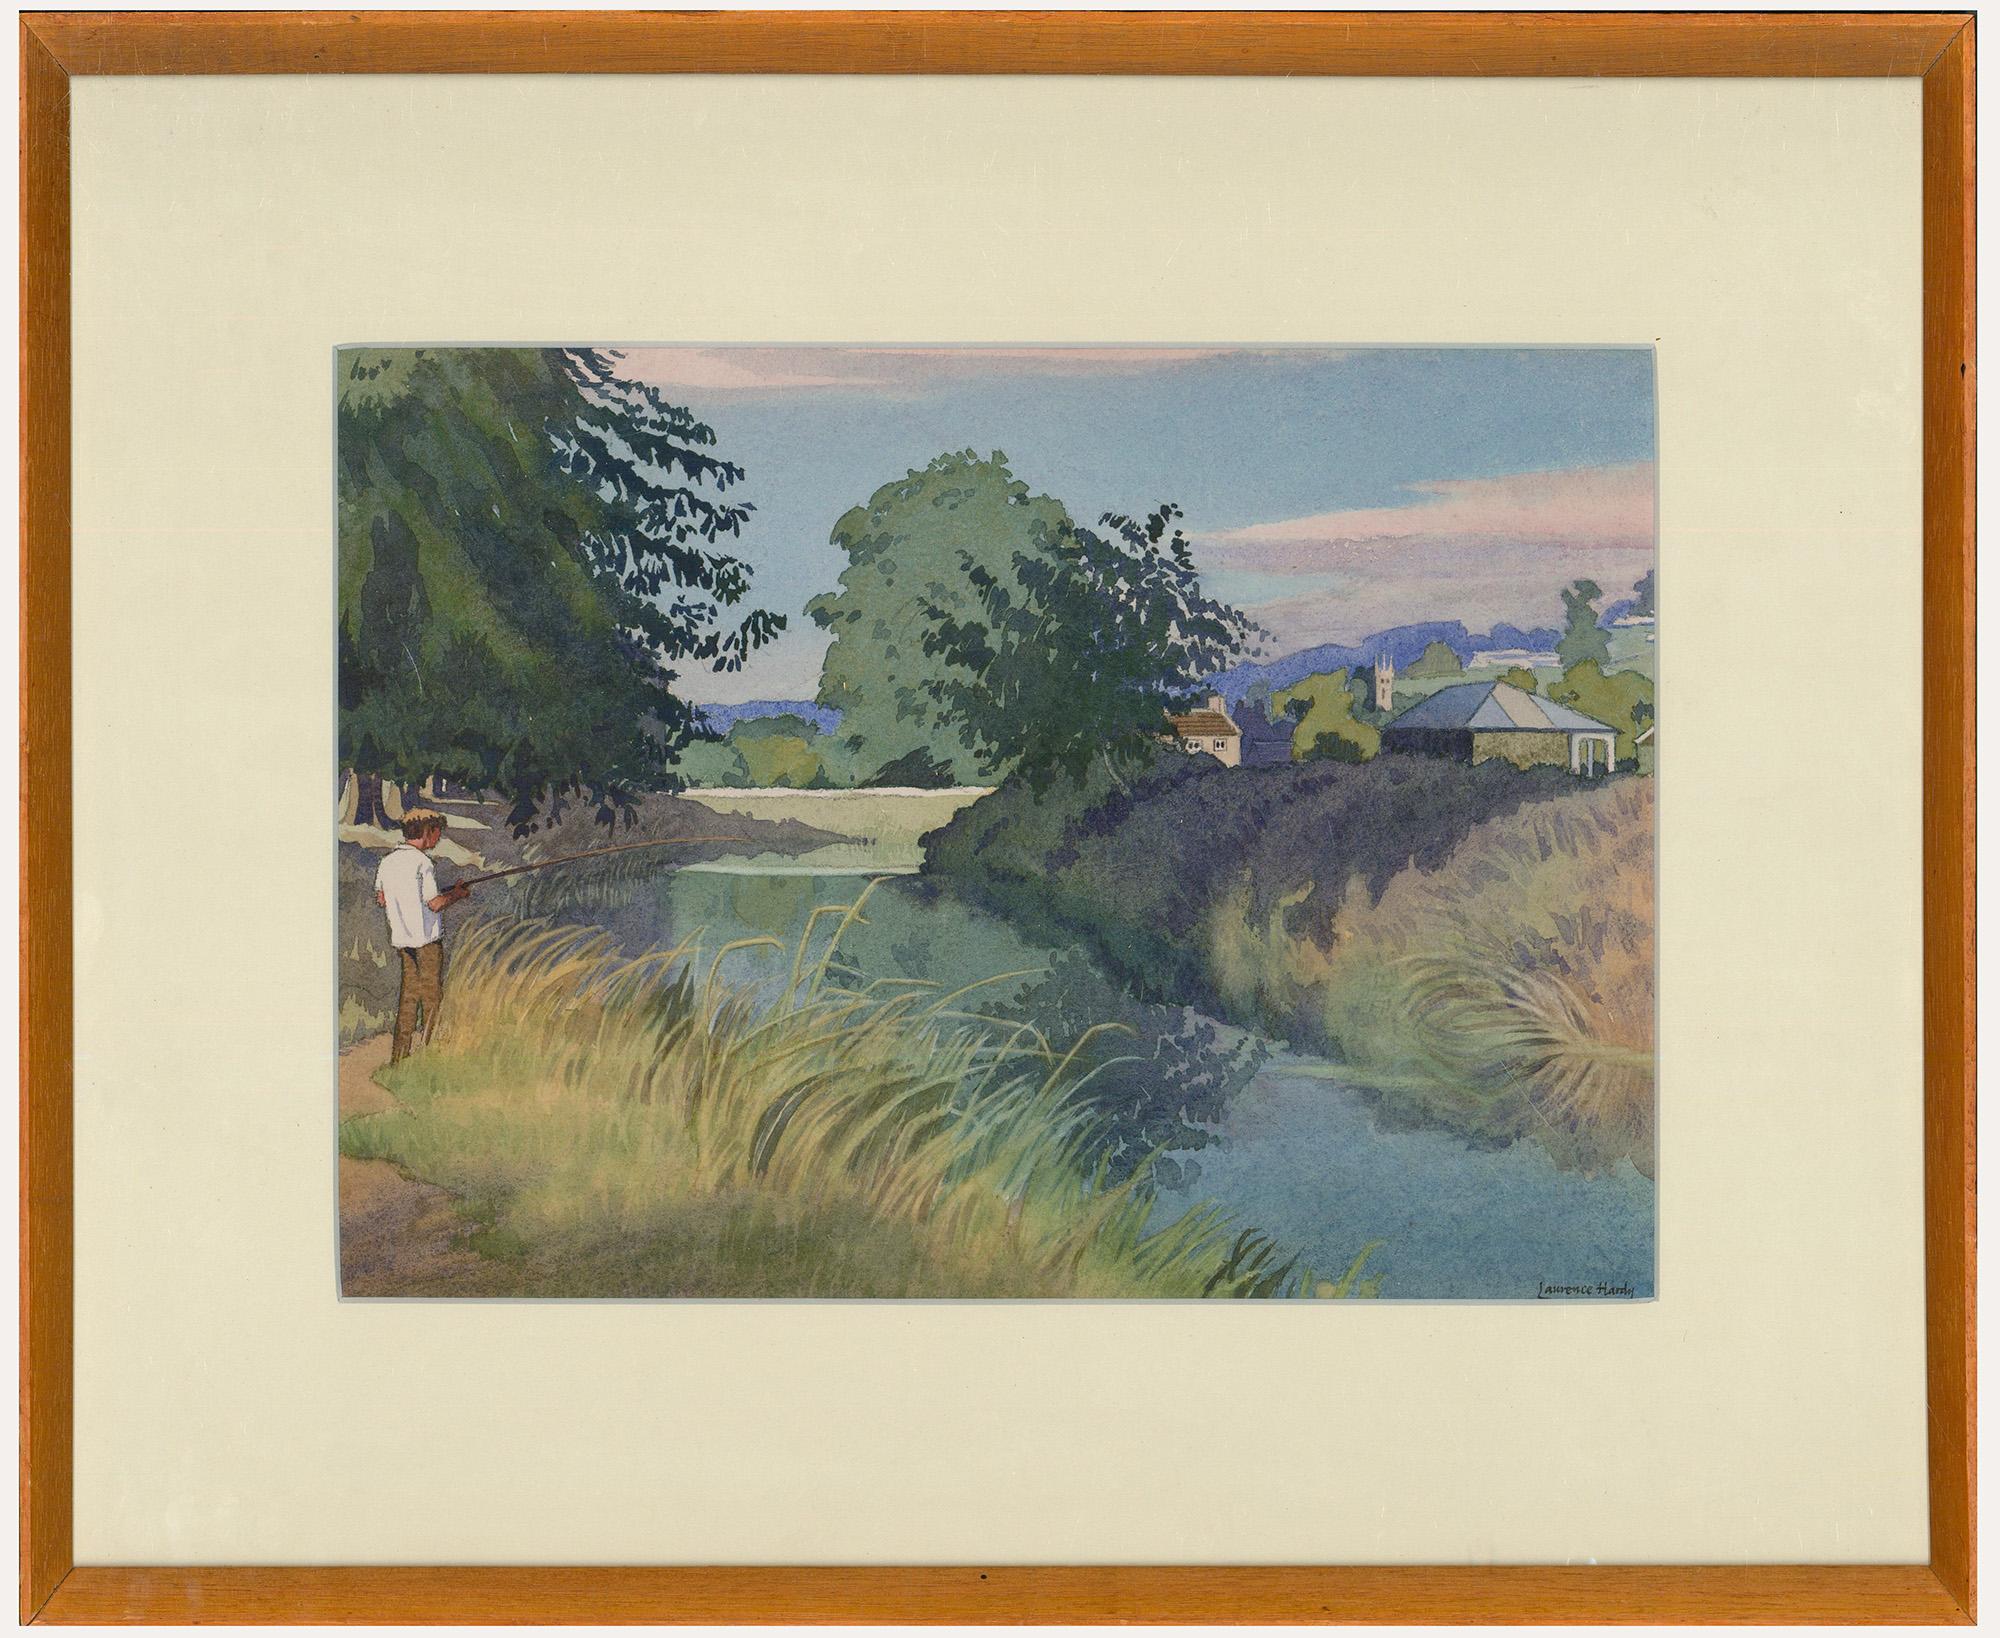 Unknown Landscape Art - Laurence Hardy - Mid 20th Century Watercolour, Summer Evening, Bathampton